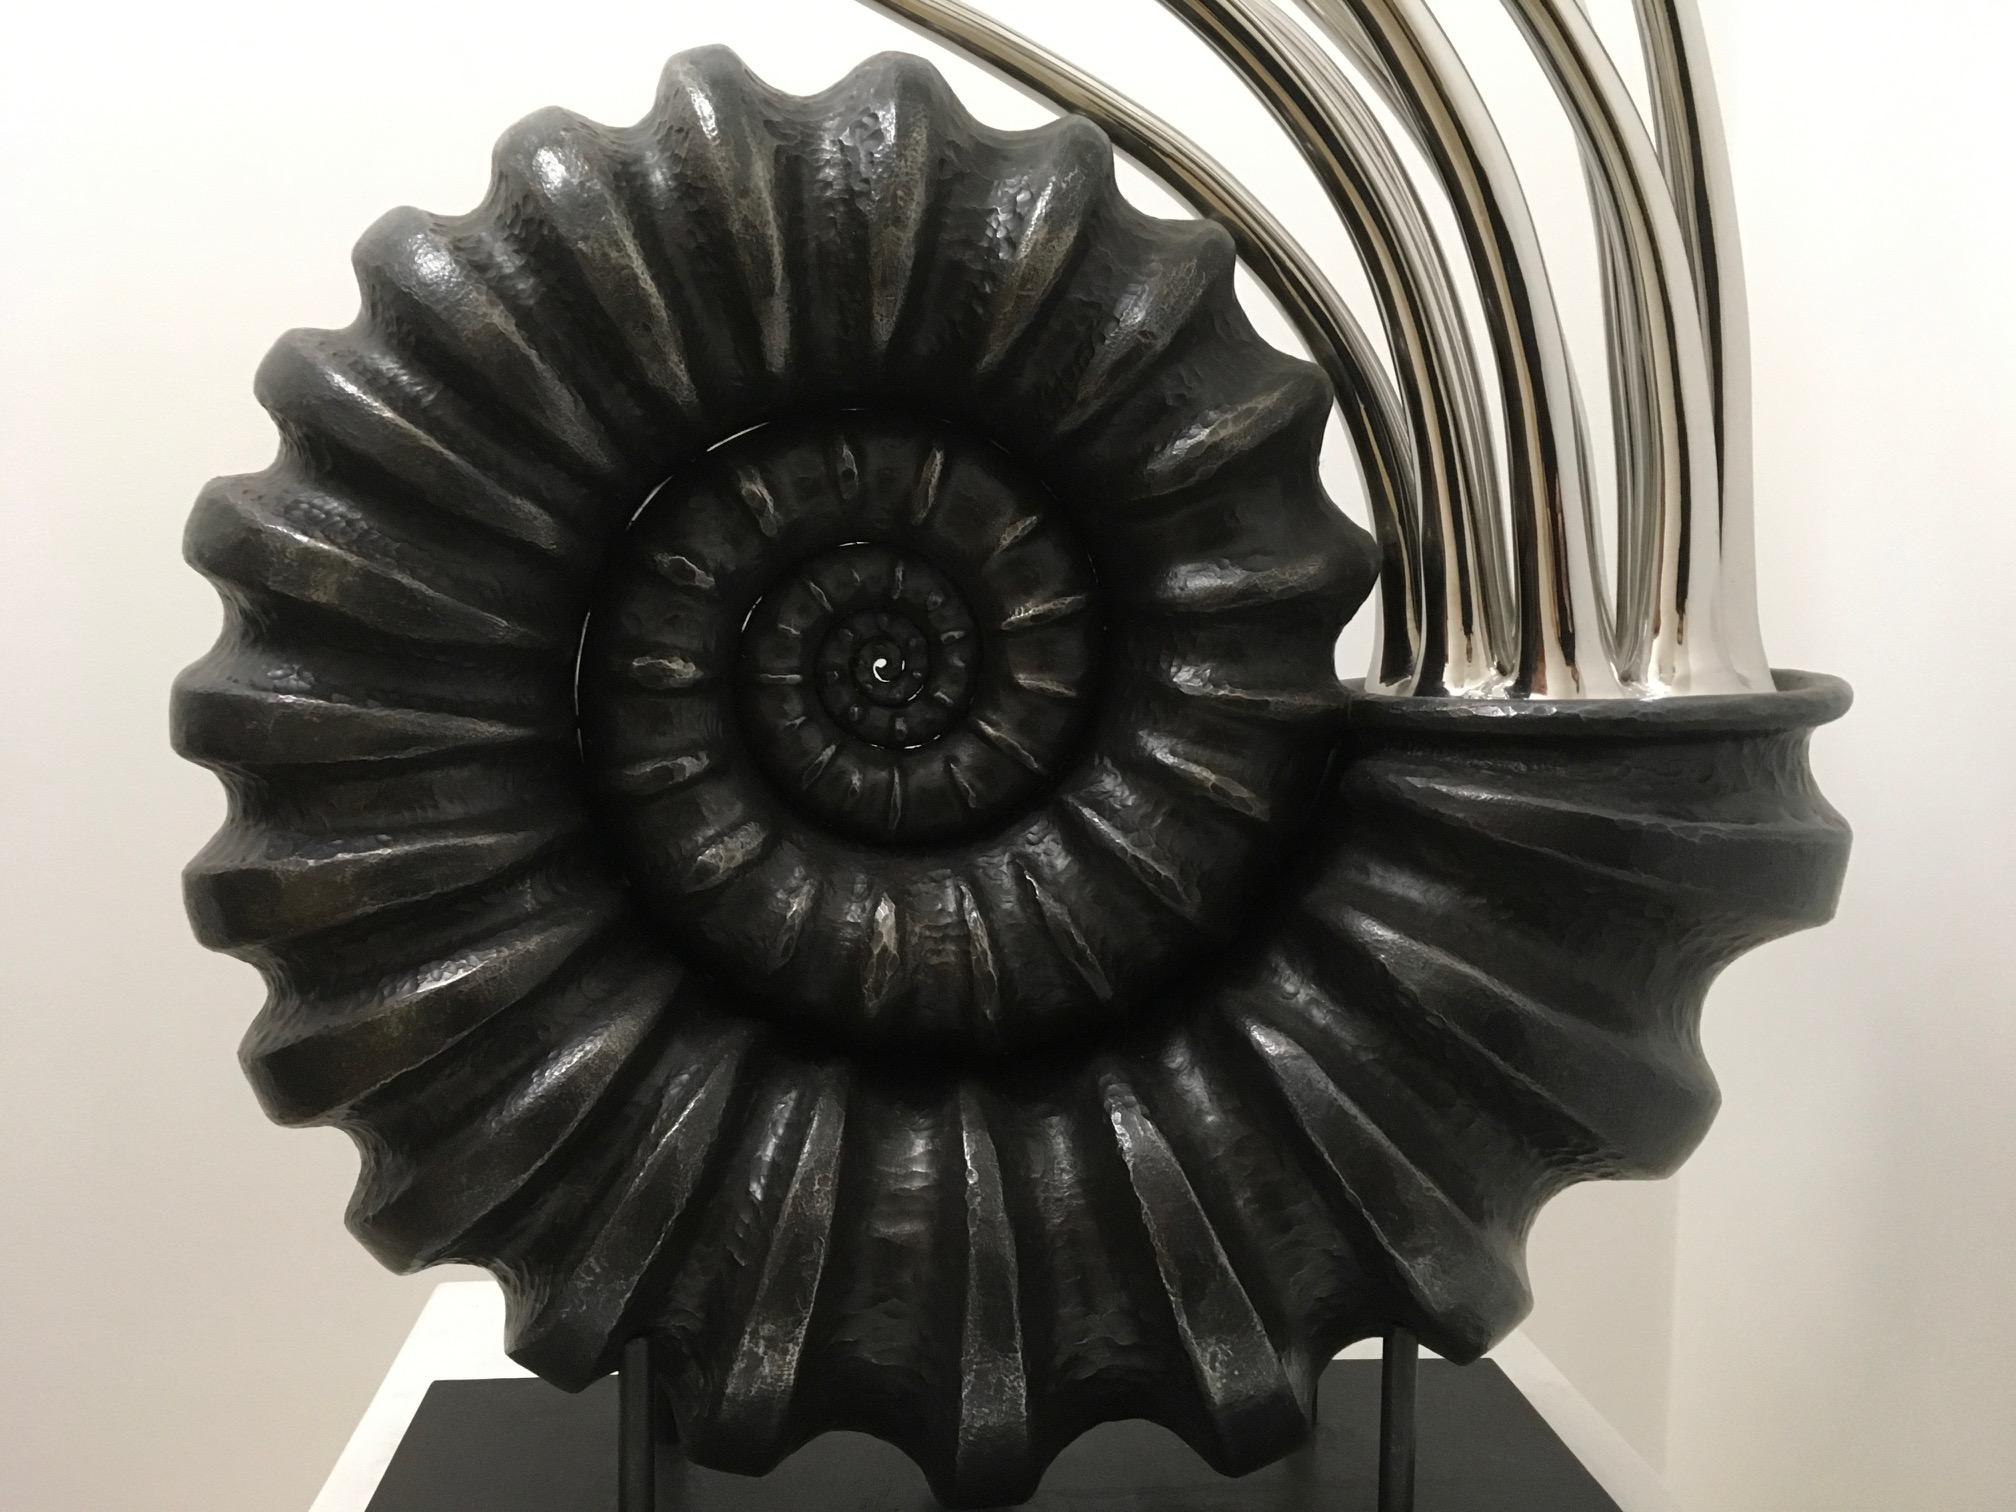 Sculpture in mild steel by Giovanni Rotondo from Italy, 2017. Unique piece.

Biography
Giovanni Rotondo was born in November 1964 in Rosolini, a small town in the south east of Sicily.
He started learning the first rudiments of forging and tempering